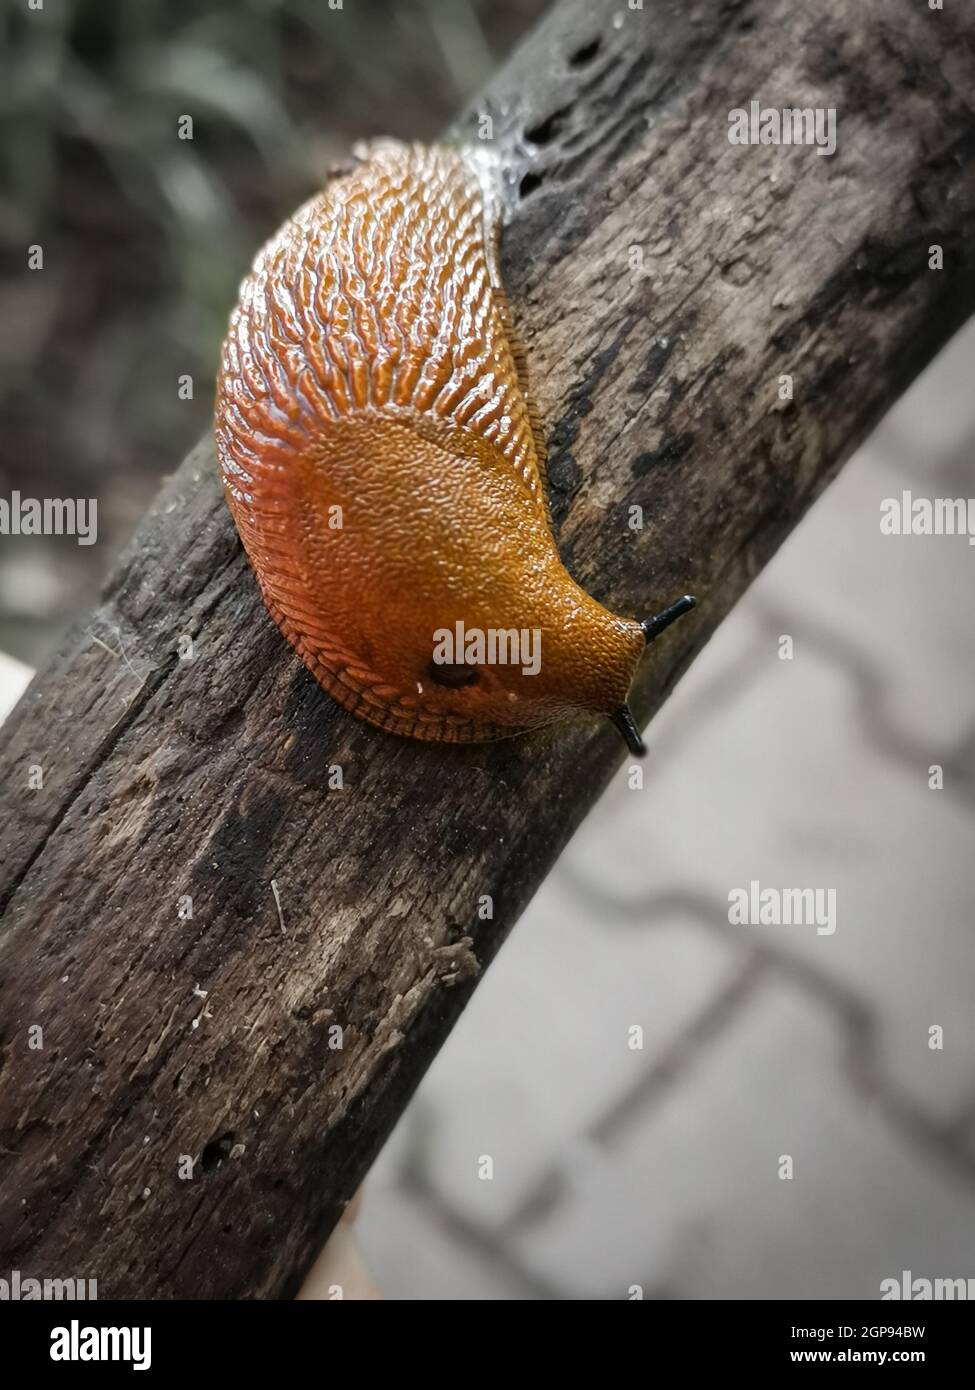 Vertical shot of a snail without a shell crawling on a wooden branch in a field Stock Photo